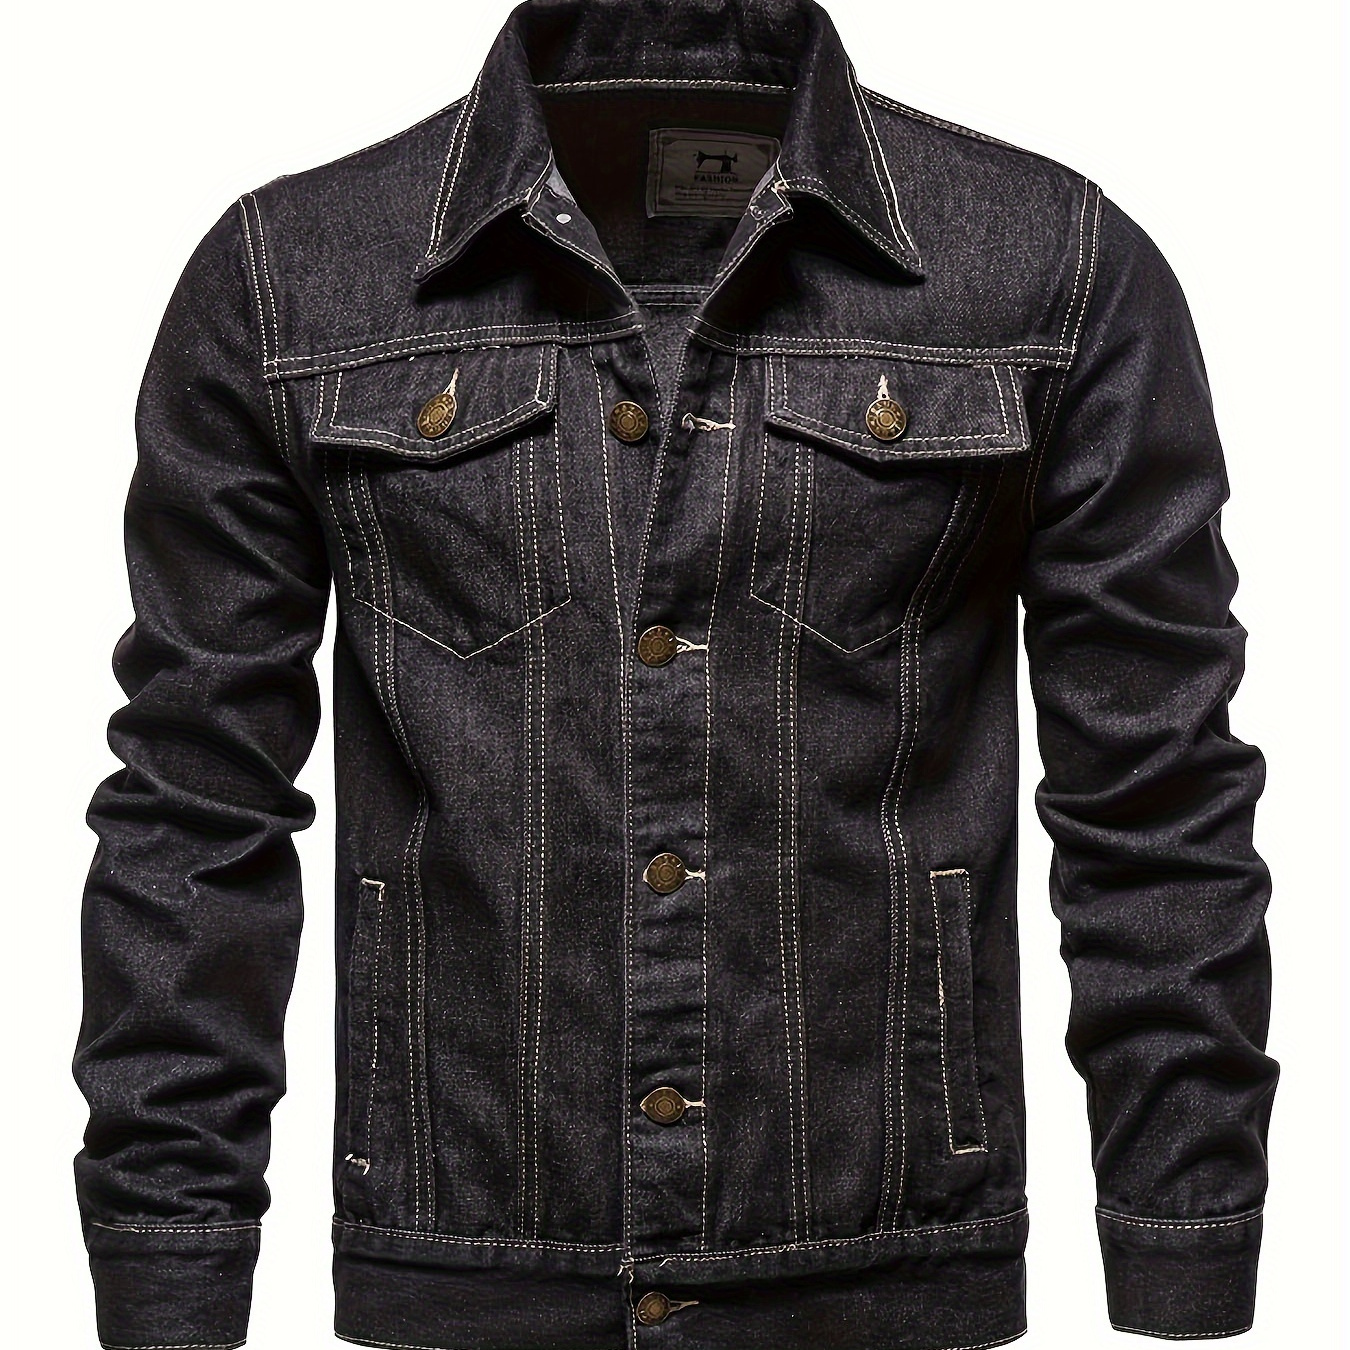 

Men's Fashion Casual Denim Jacket, Button-up Jean Coat With Turn-down Collar, Versatile Outdoor Outerwear